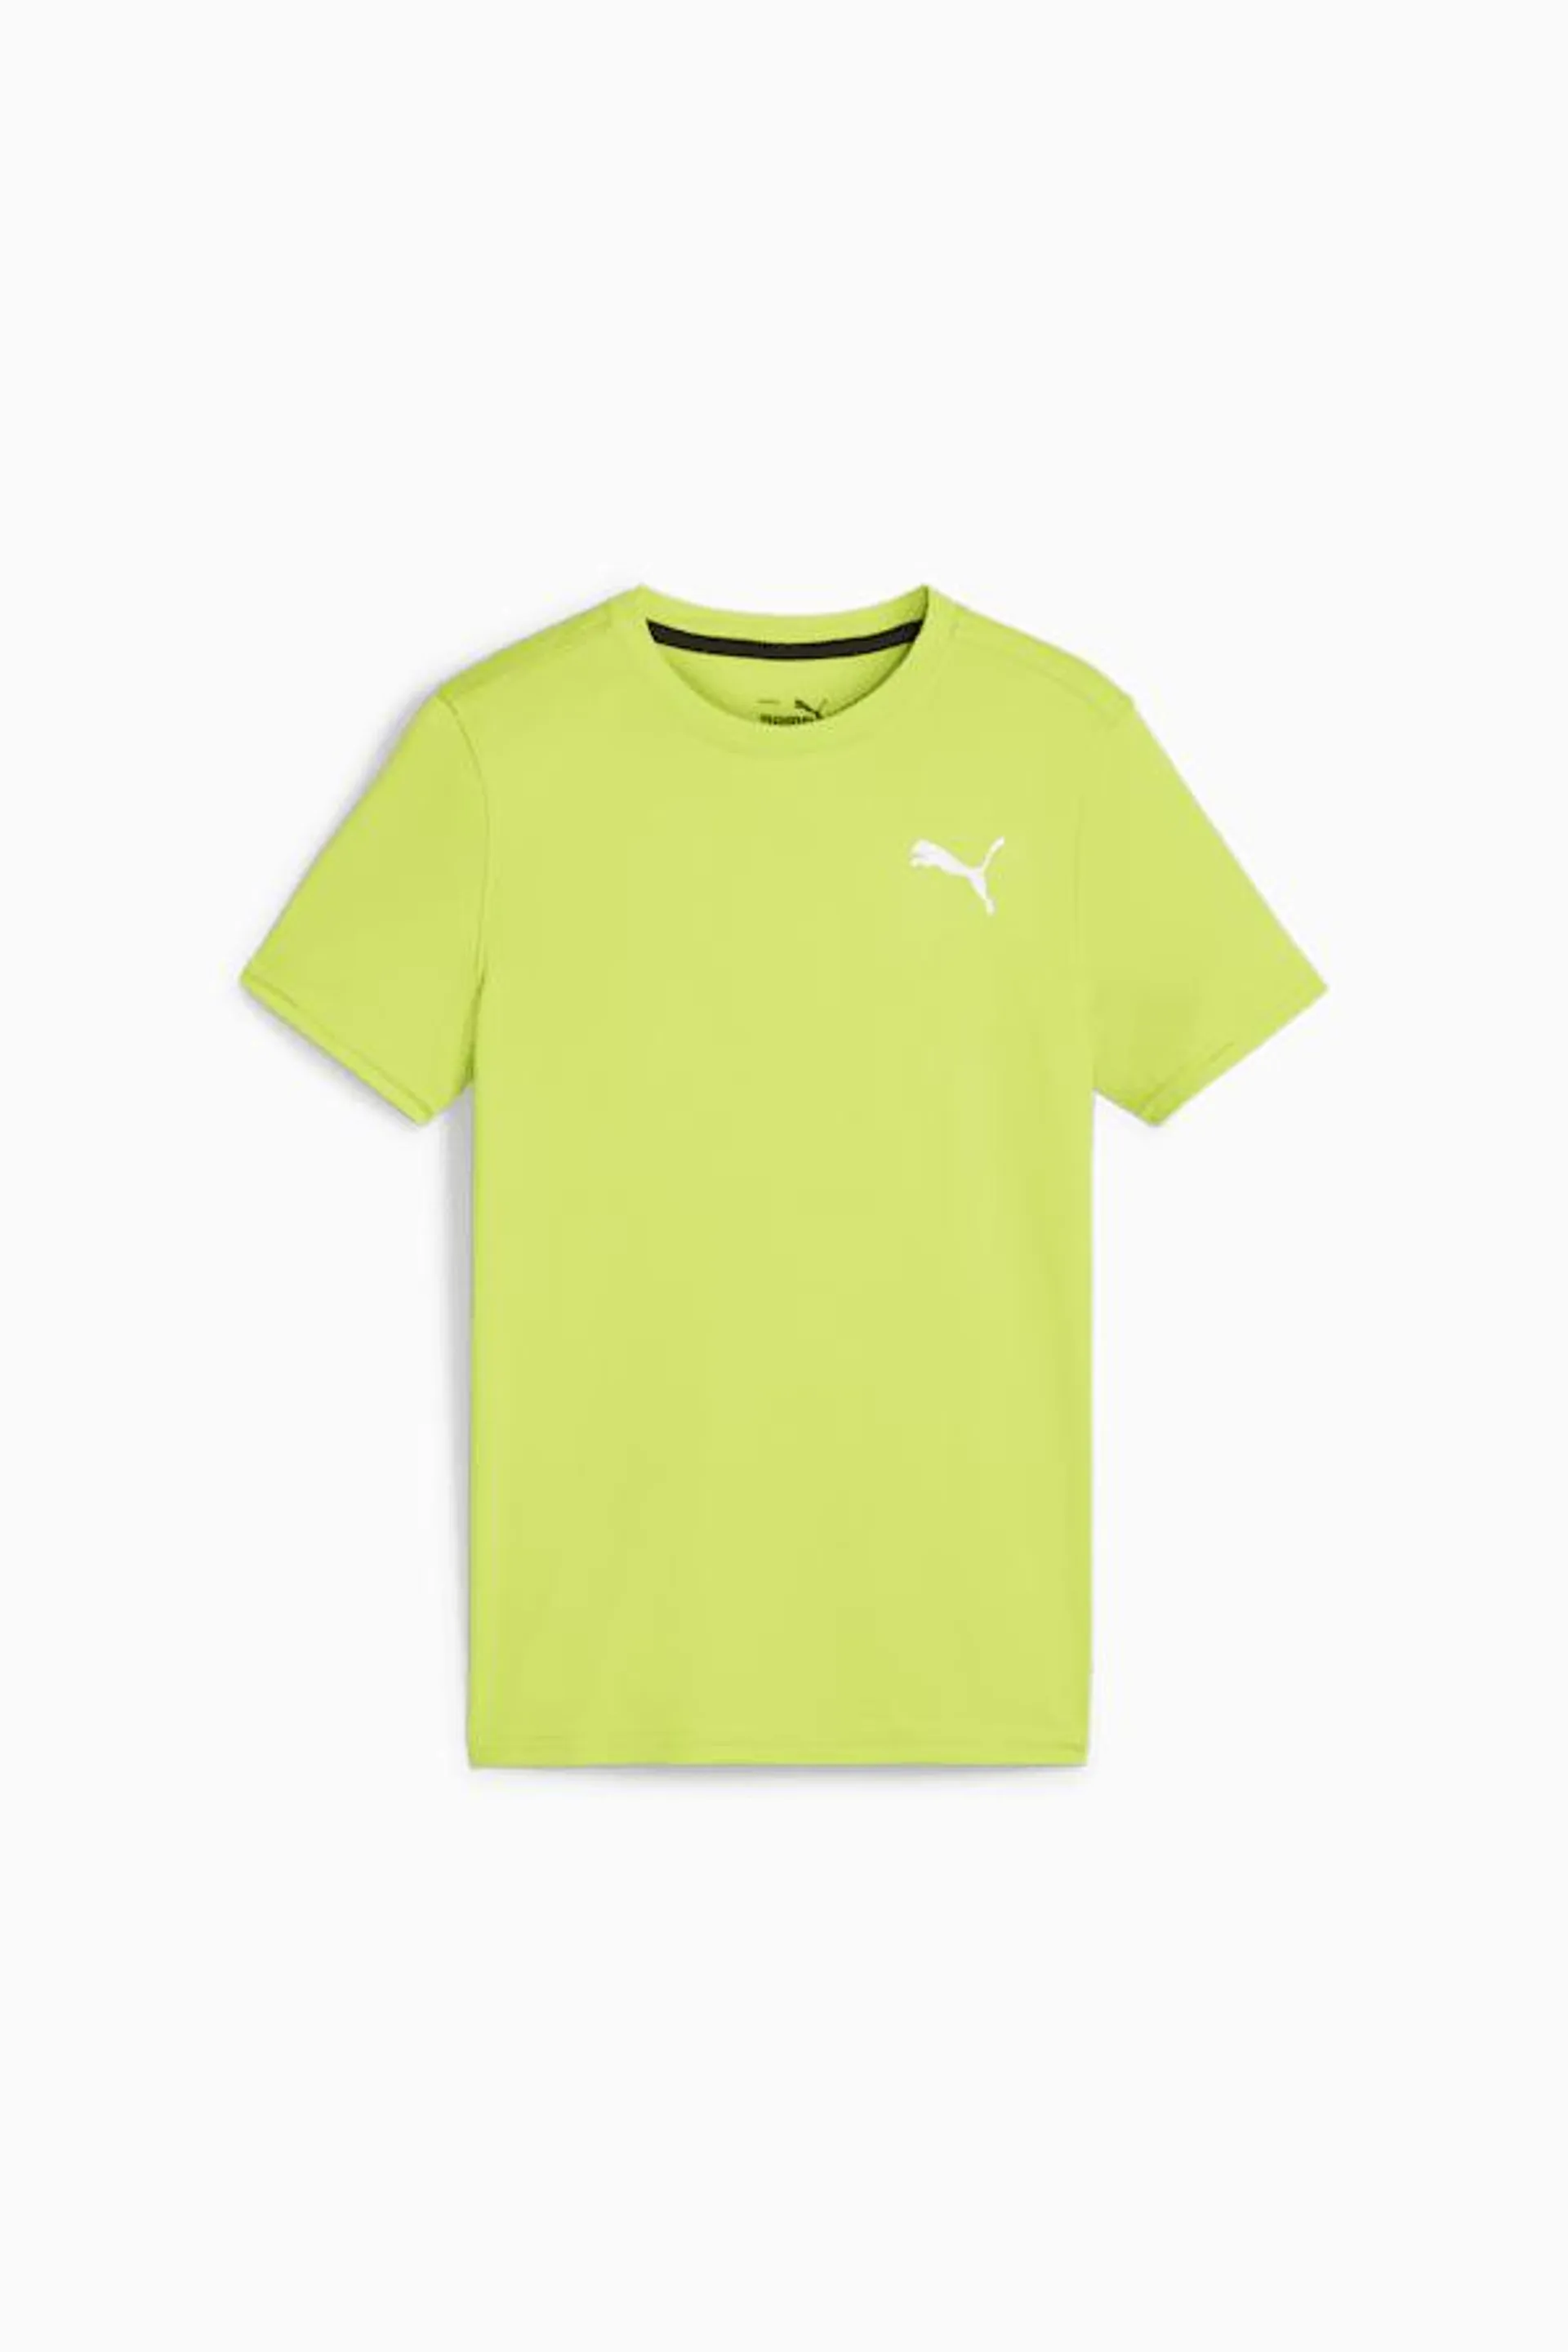 PUMA FIT Youth Tee